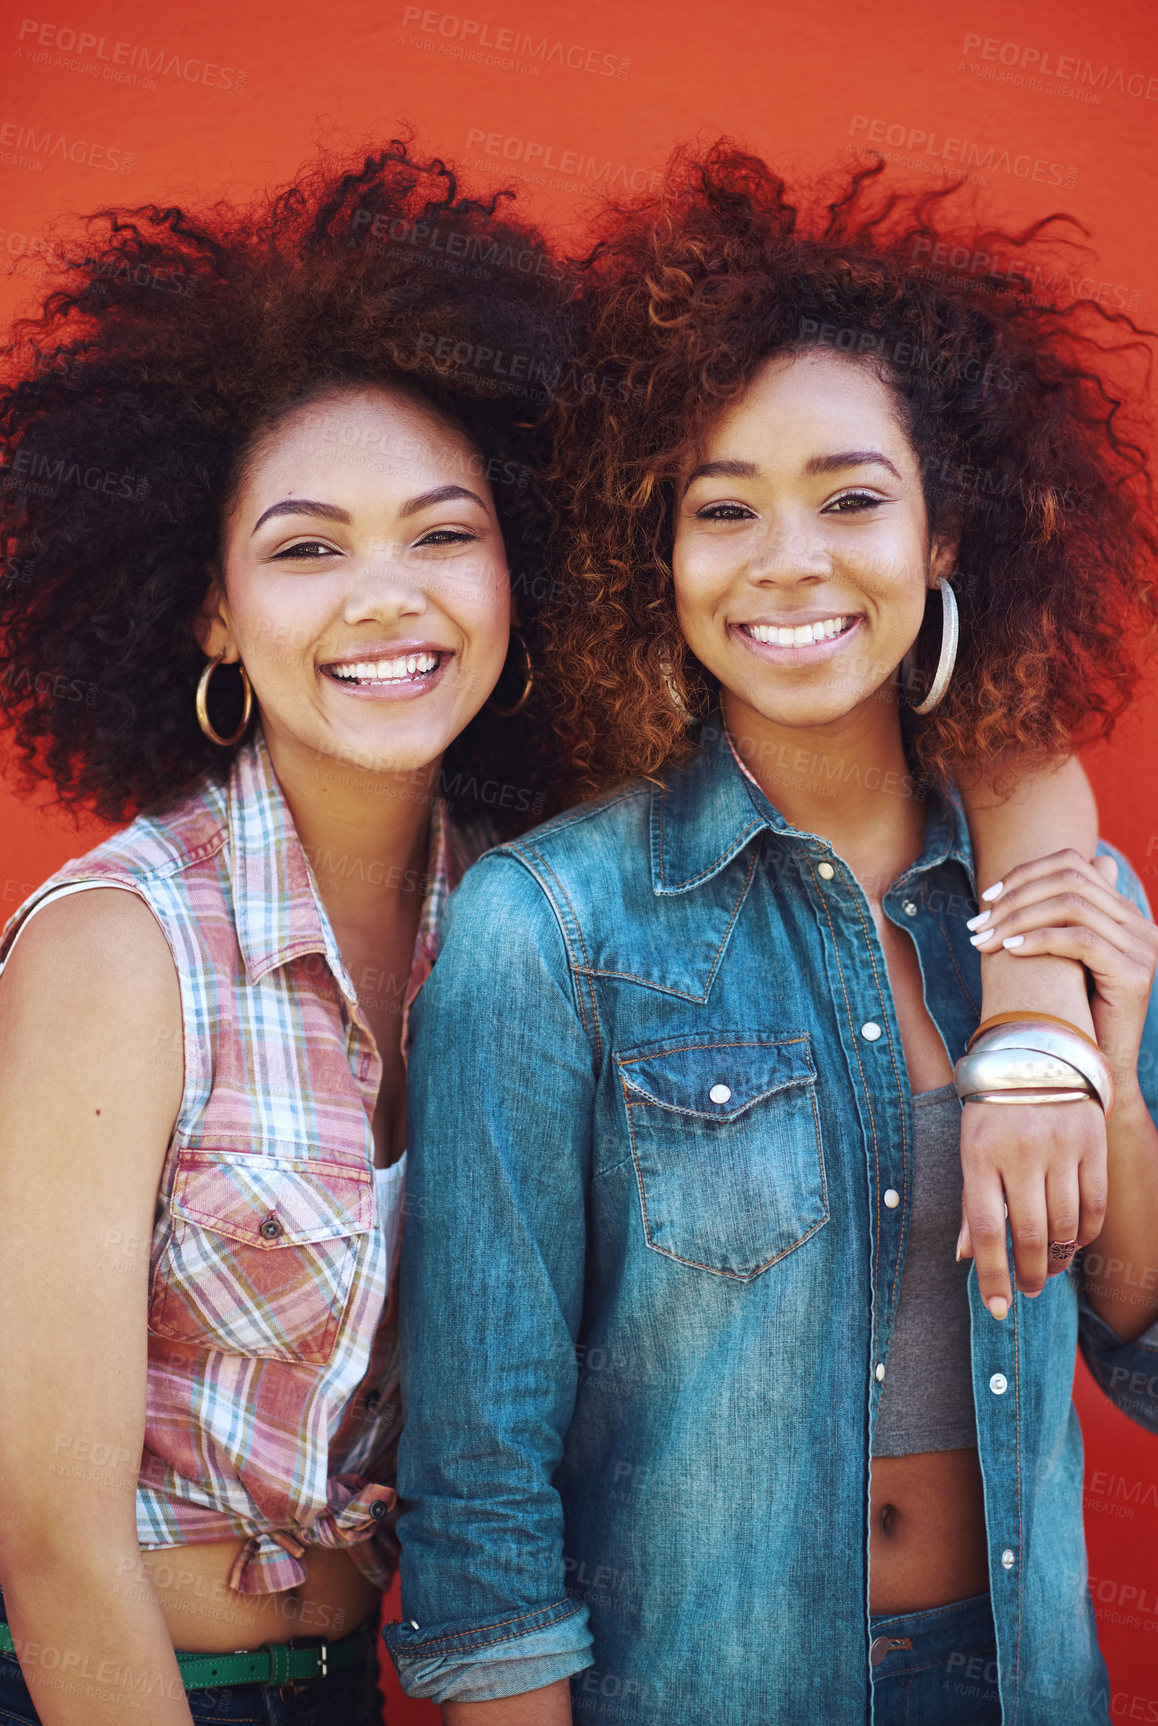 Buy stock photo Shot of two young friends posing against a red background